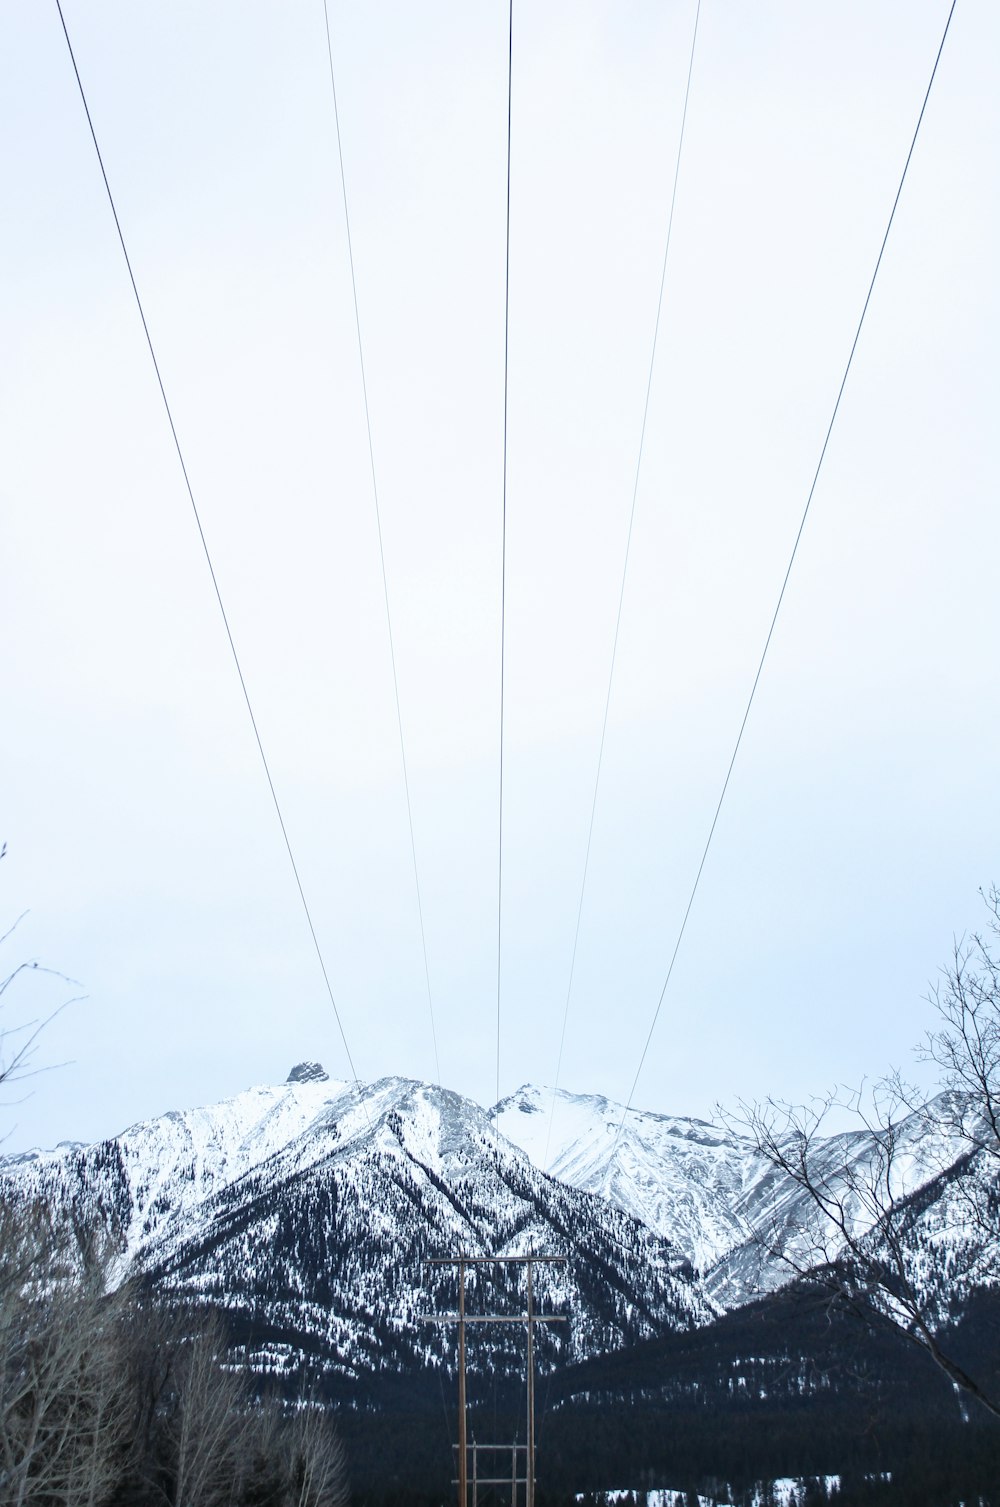 a view of a snowy mountain range with power lines in the foreground